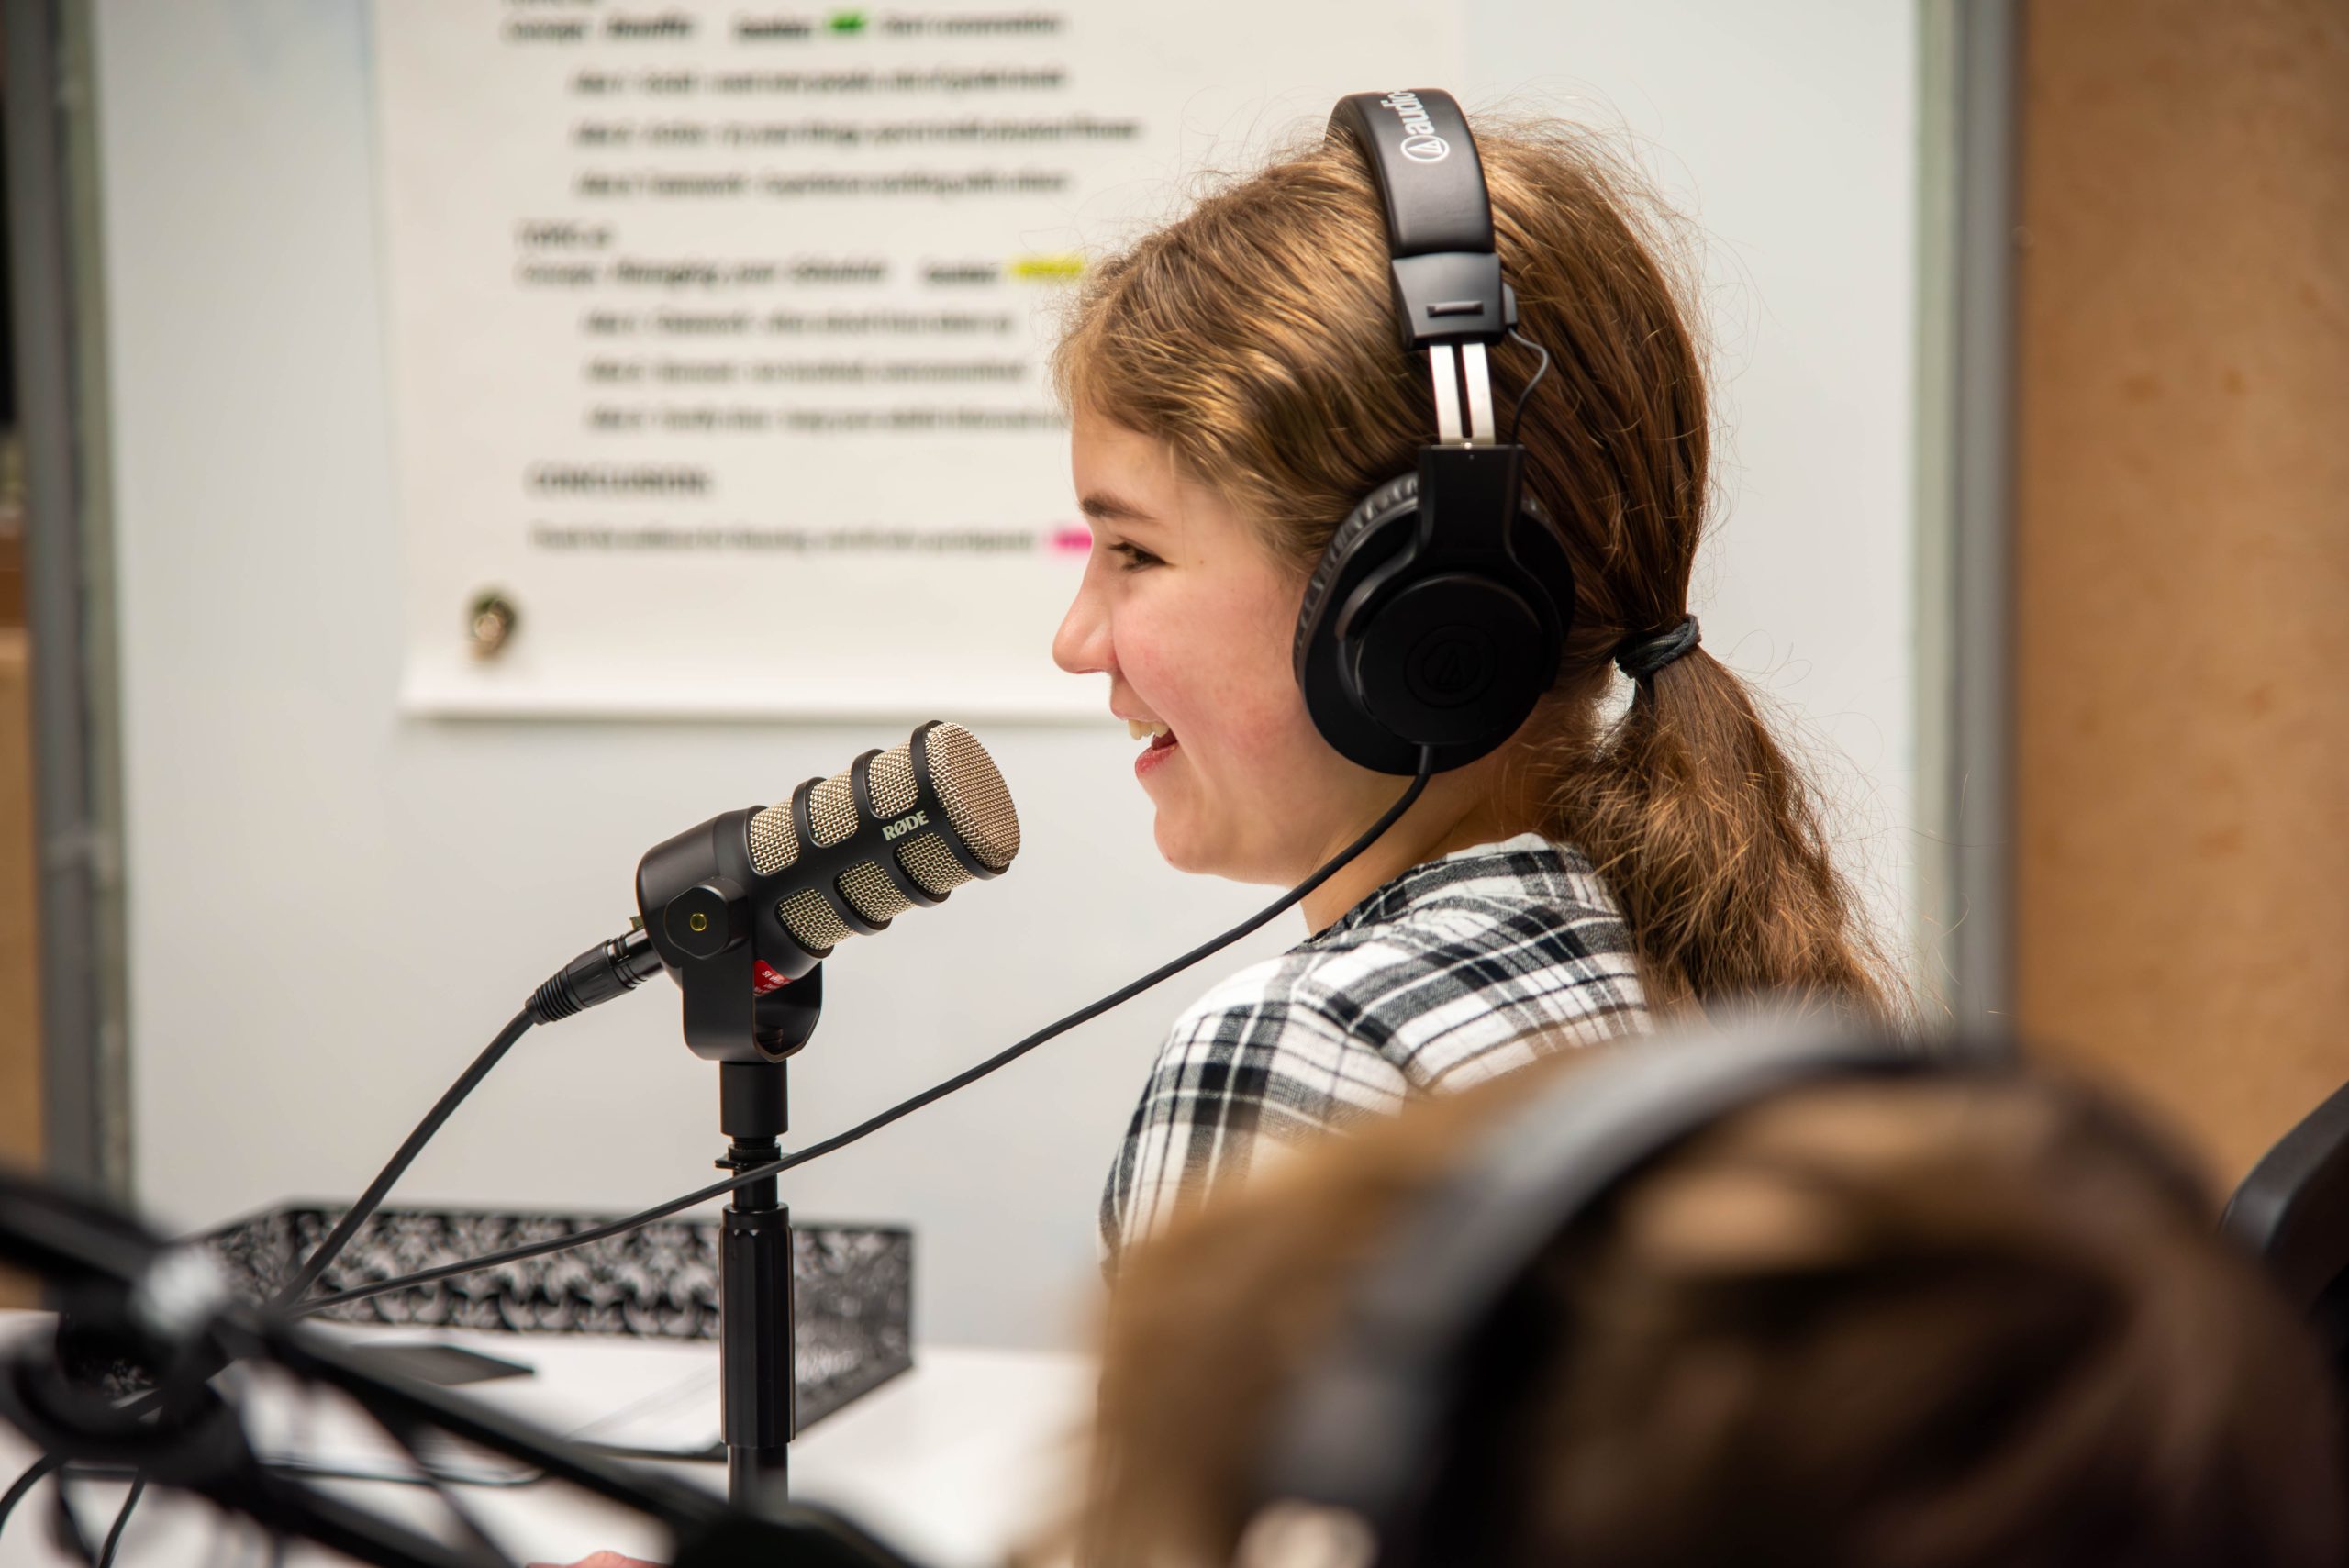 Coal Ridge Middle School student smiles during podcast recording